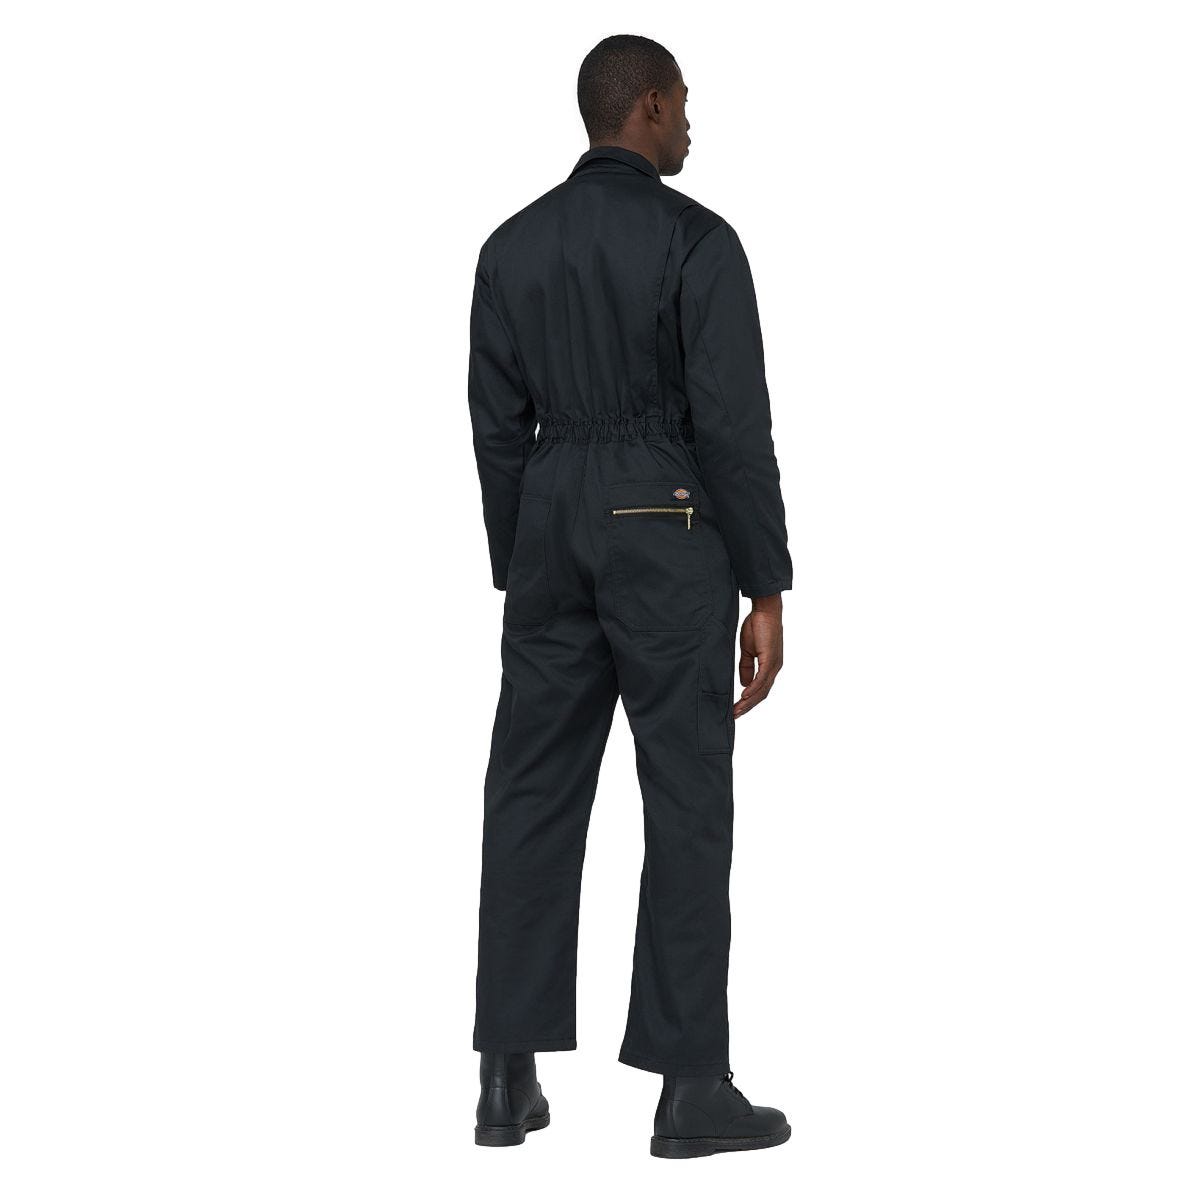 Combinaison Redhawk Coverhall Noir - Dickies - Taille XL 4